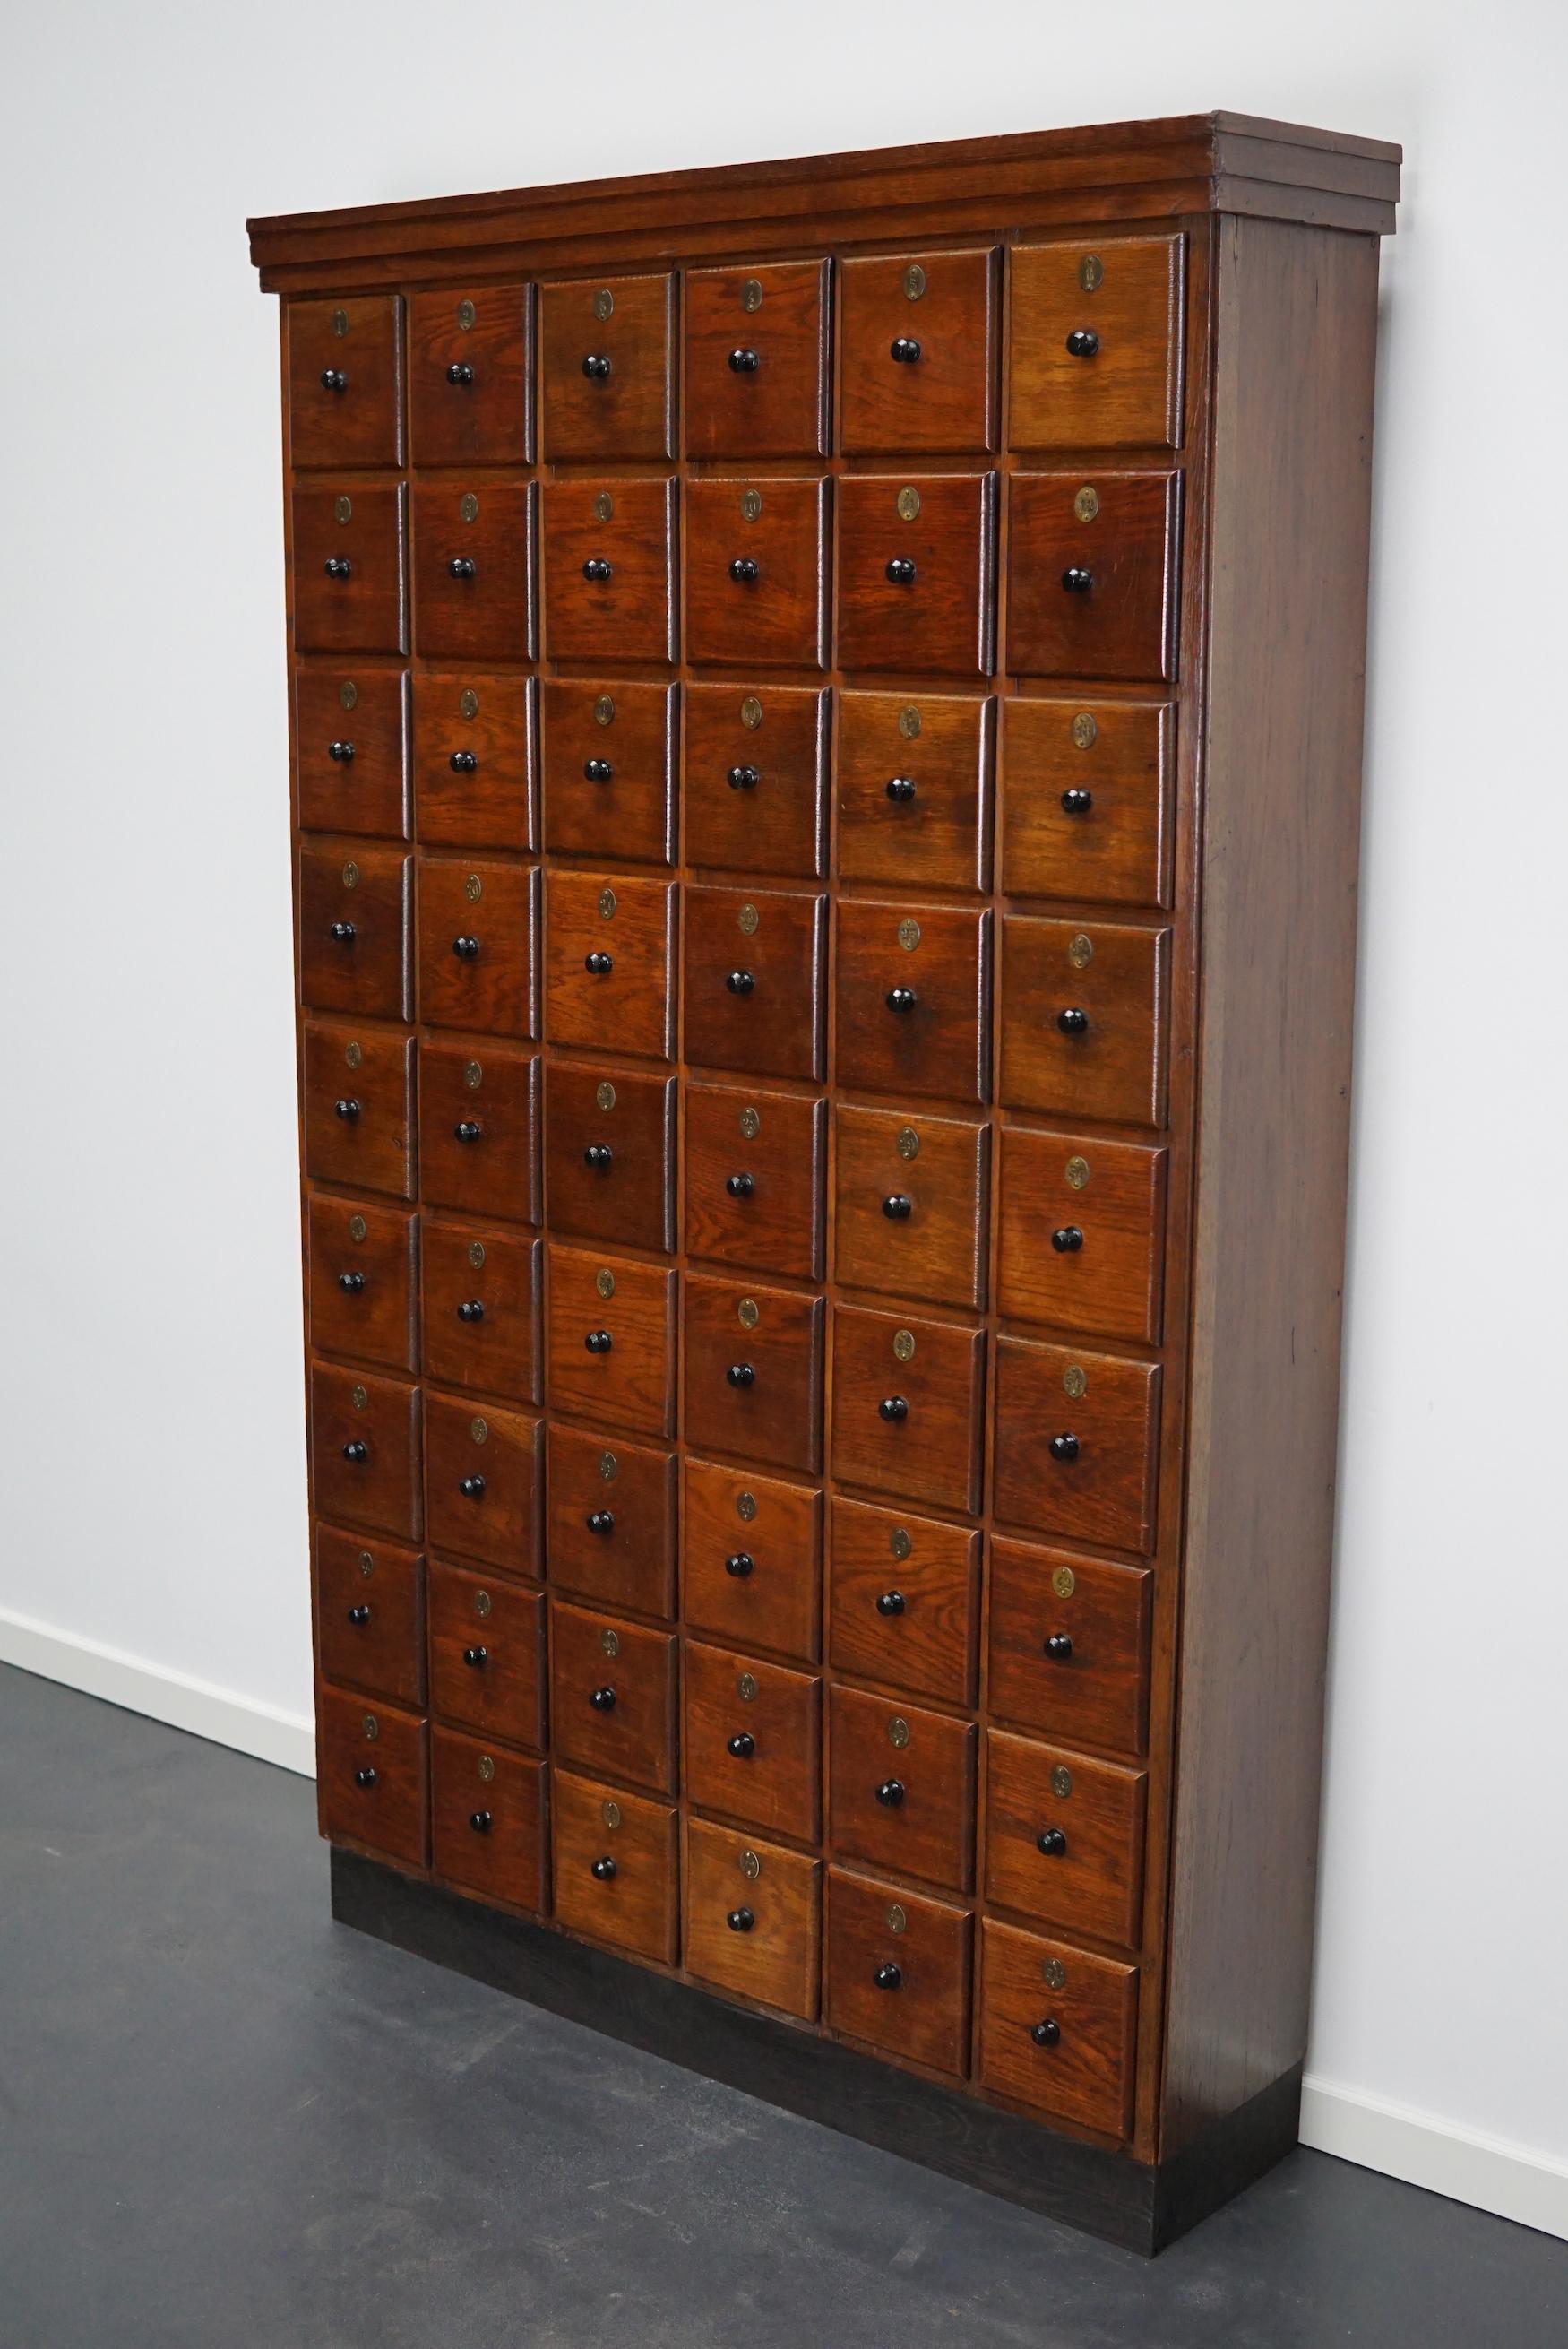 This apothecary cabinet was made circa 1920s in the Netherlands. It features 54 drawers with amazing bakelite knobs and brass numbers. It was originally made for a barber in the Amsterdam region. It was used to store individual shaving supplies of